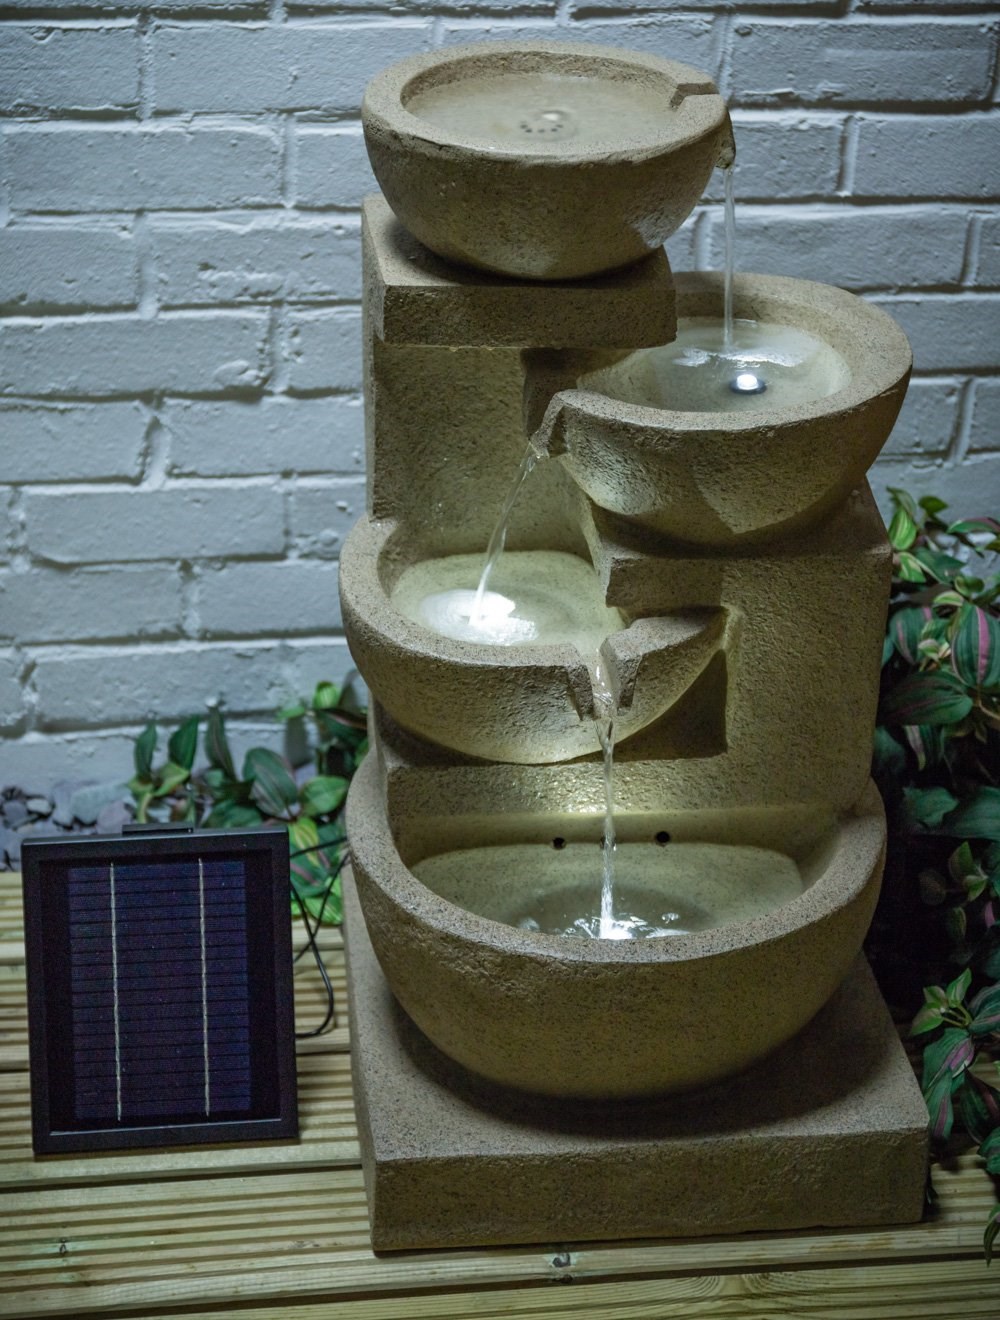 H72cm Kendal 4-Tier Cascading Solar Water Feature with Lights by Solaray